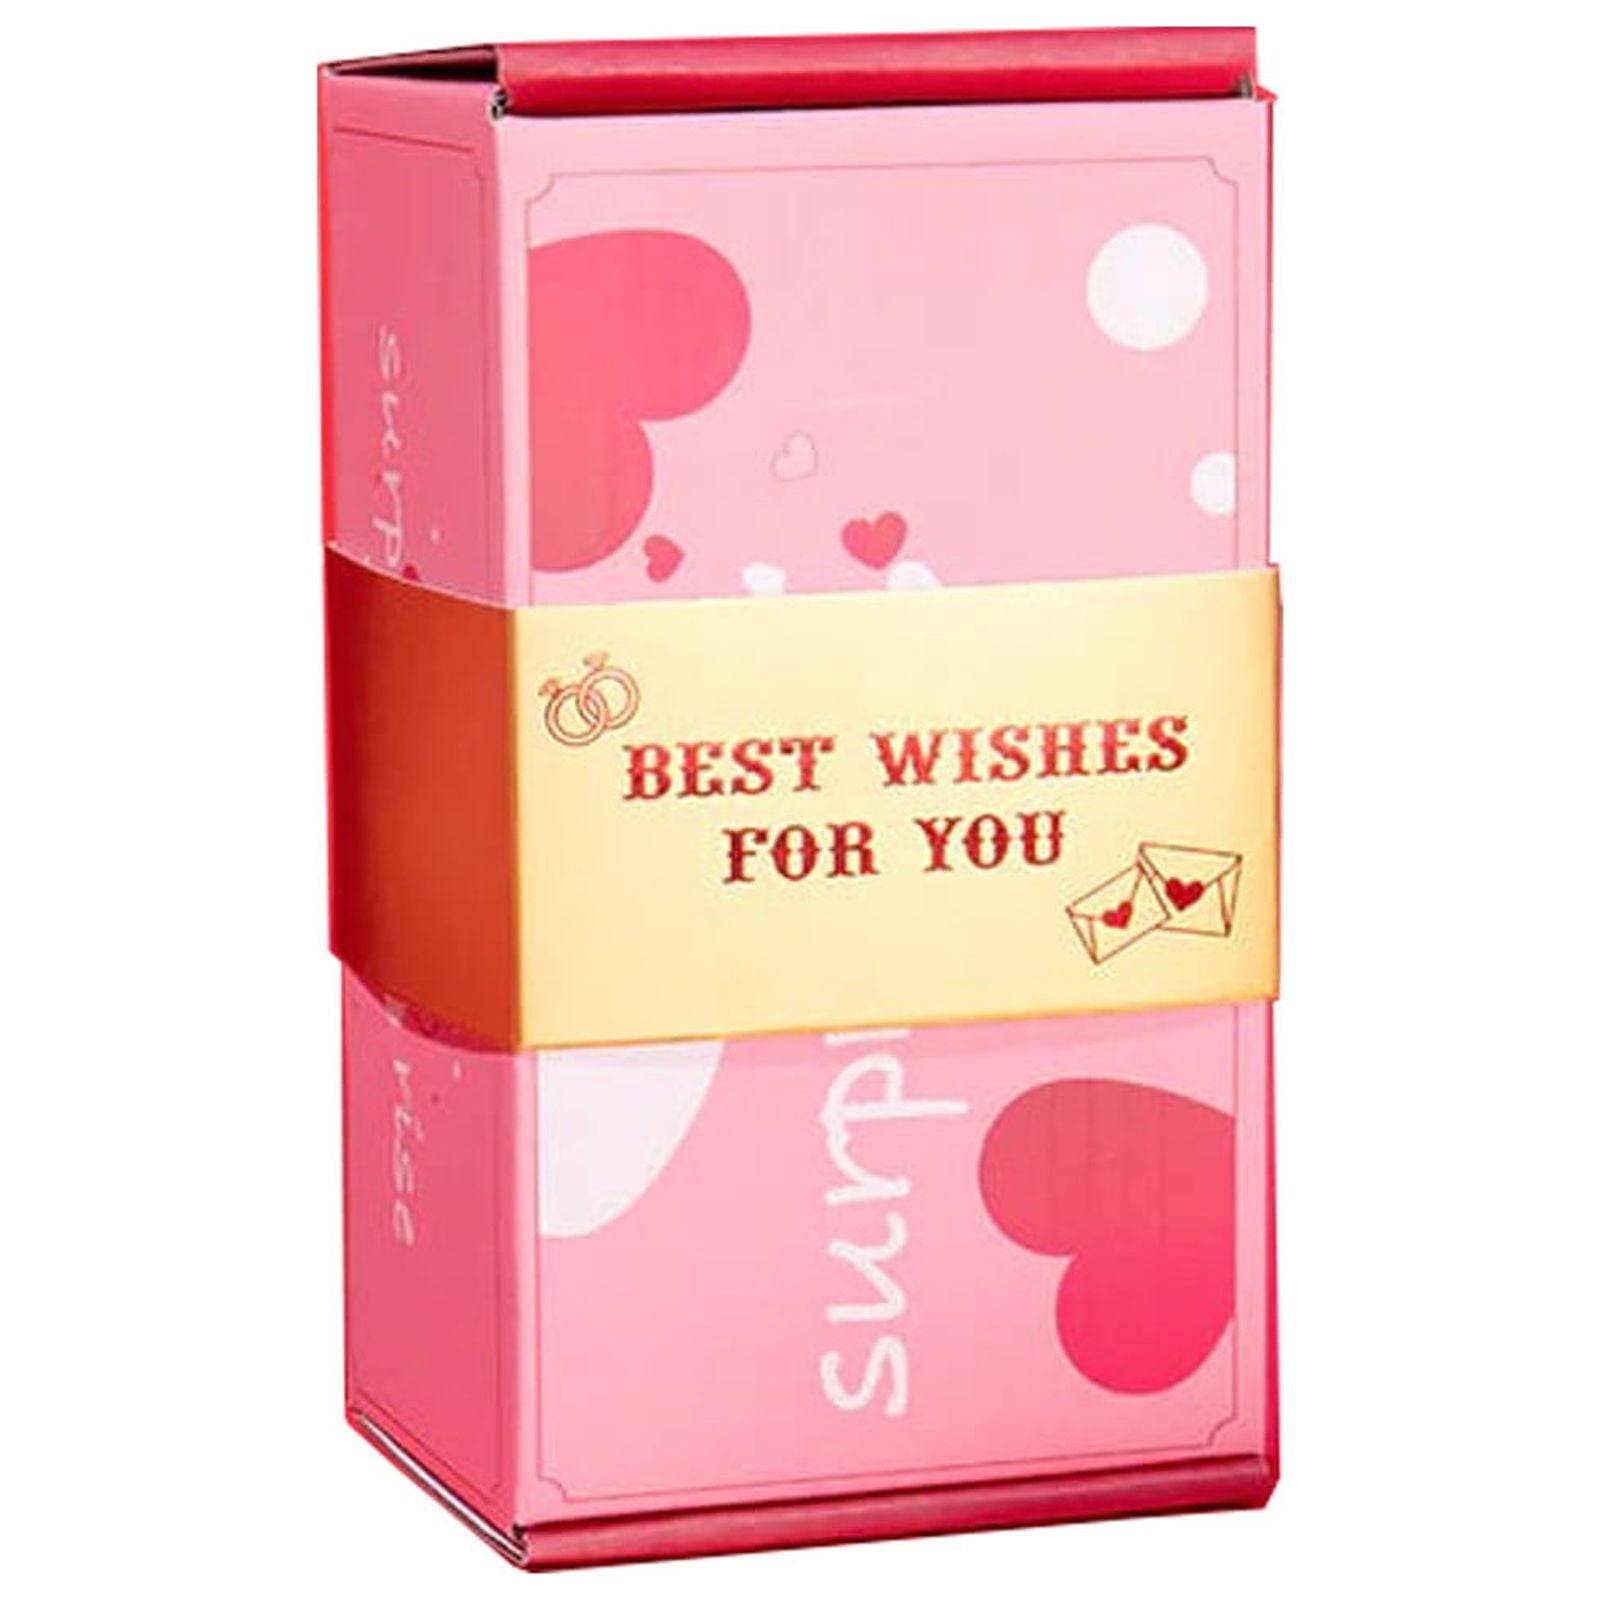 Love Messages Popup Romantic Gift Box couple gift 8 x 8 x 2.5 cm Red  Rectangular